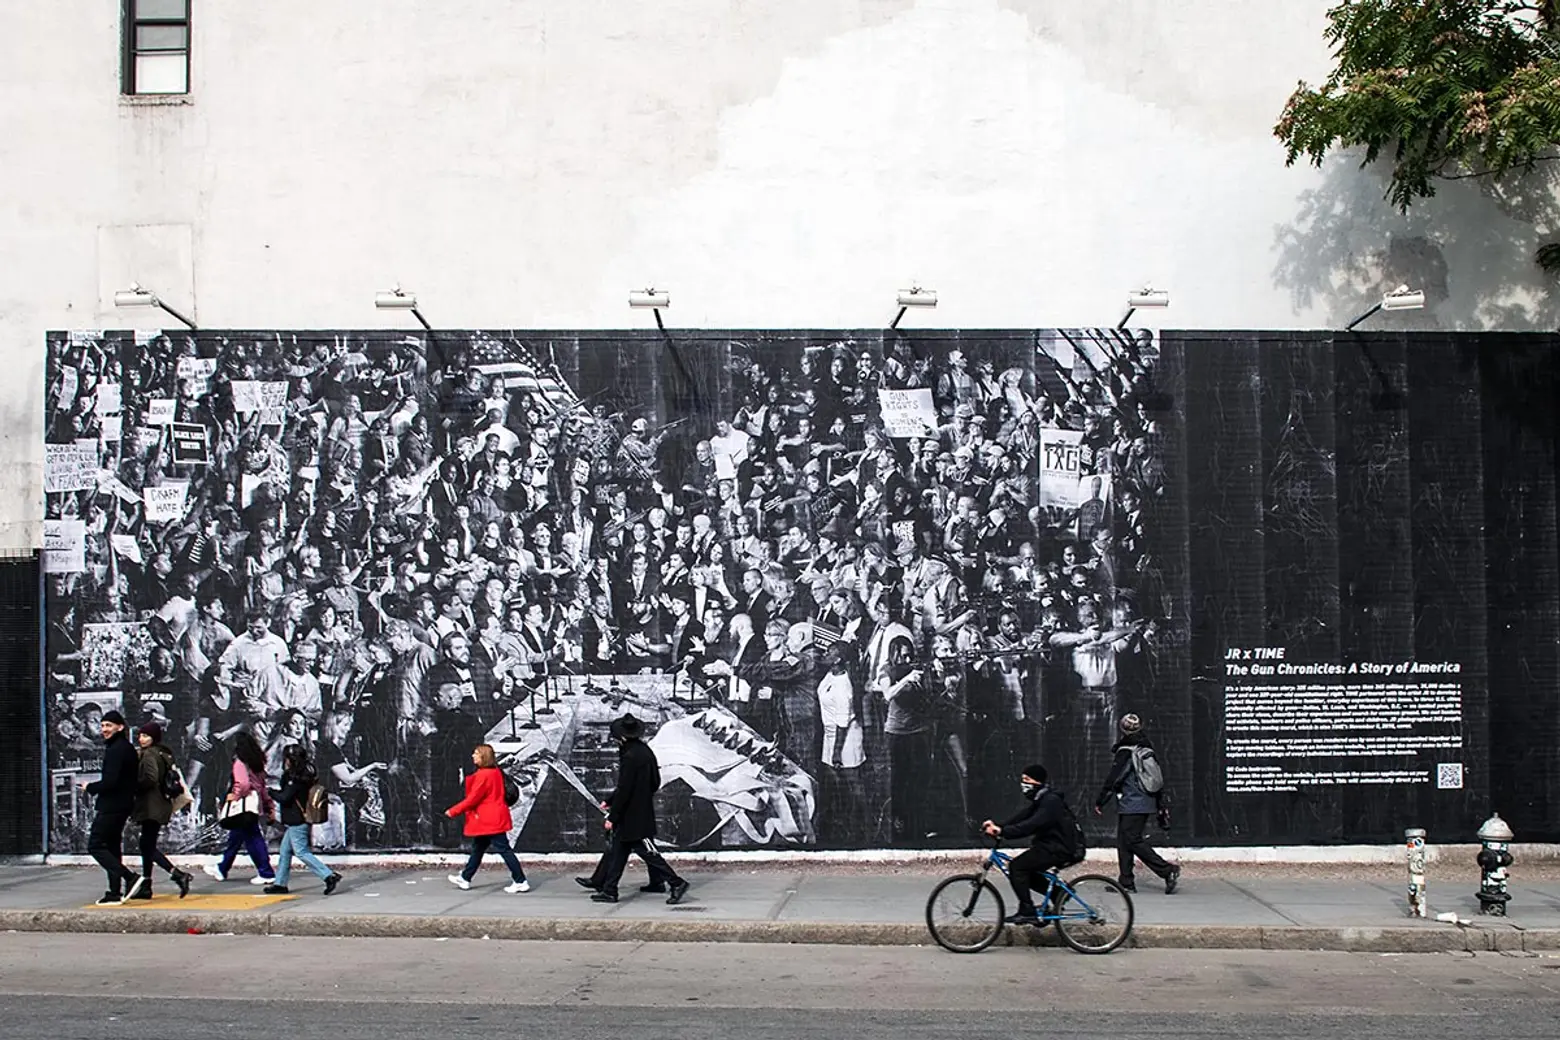 Artist JR takes over Houston Bowery Wall with a thought-provoking mural about guns in America